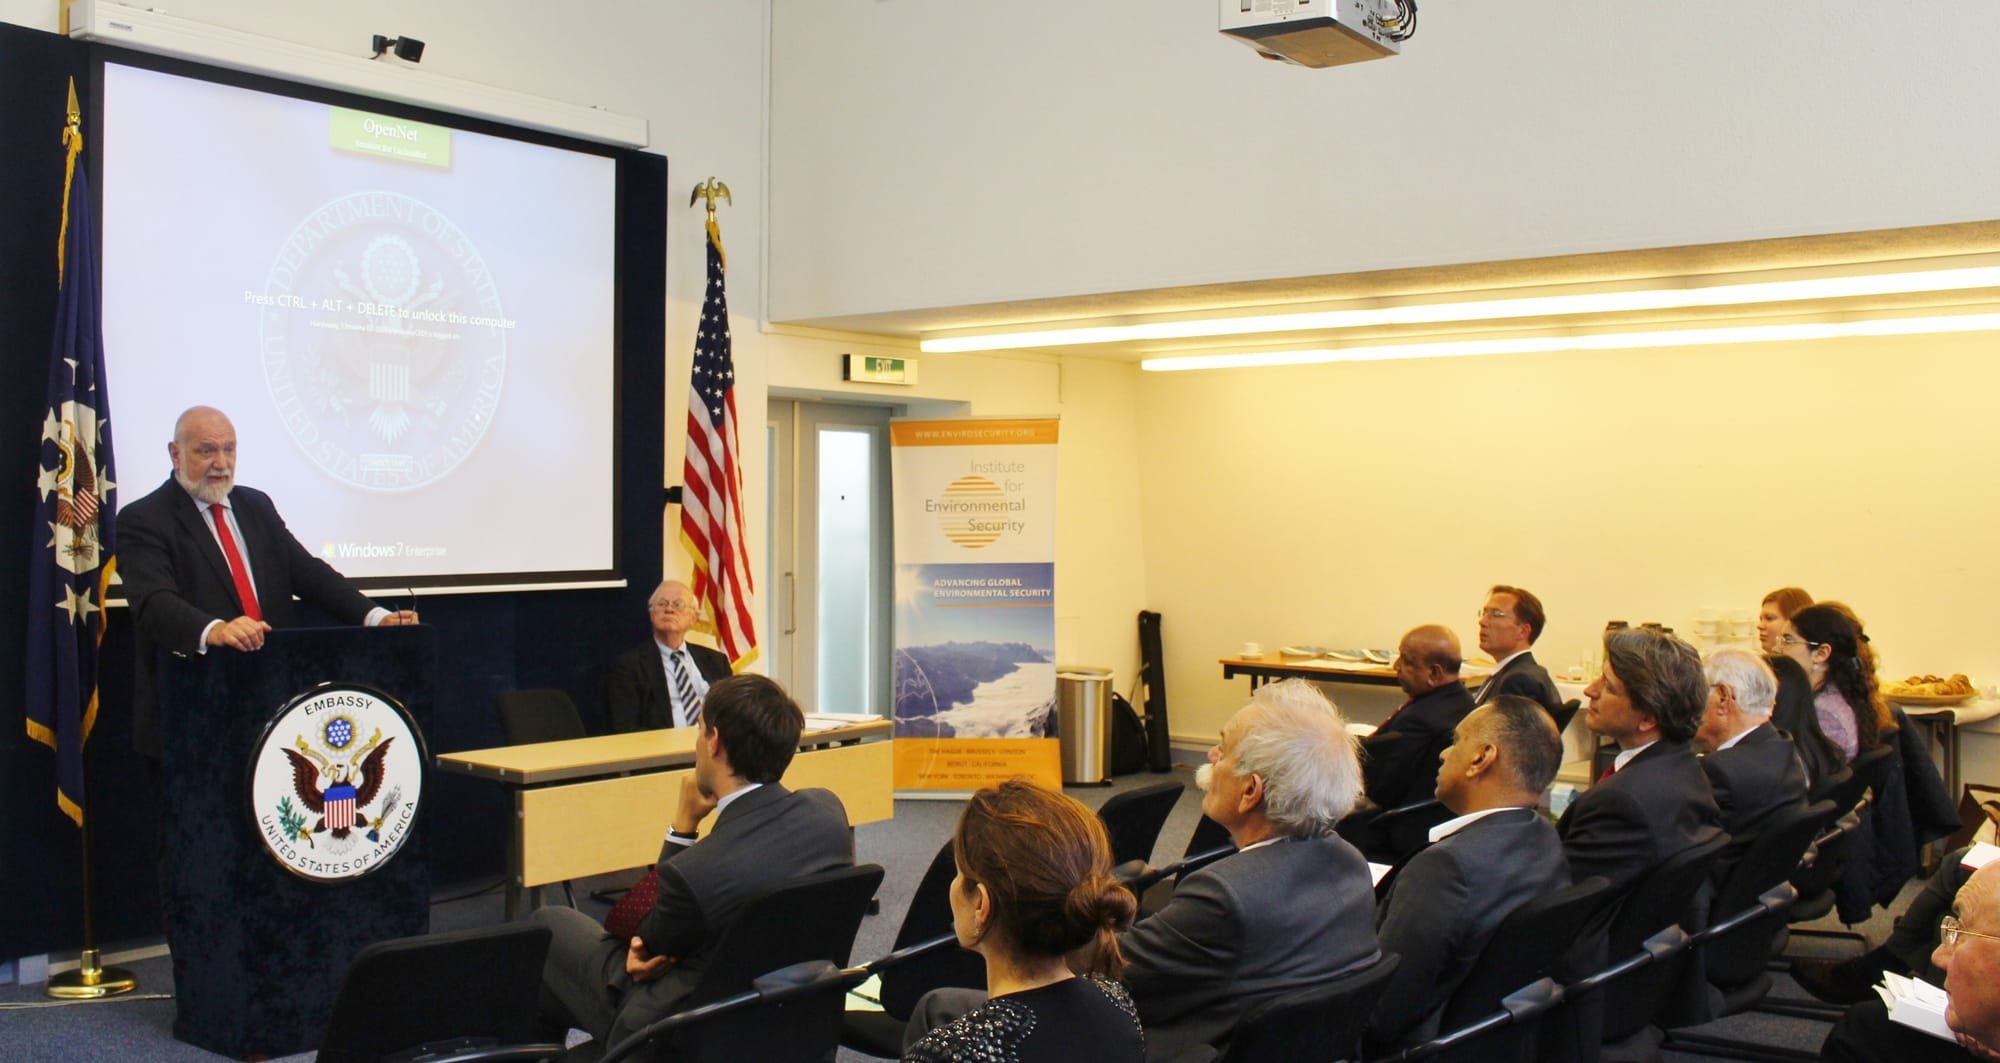 Climate and Security Action is focus At U.S. Embassy event in The Hague